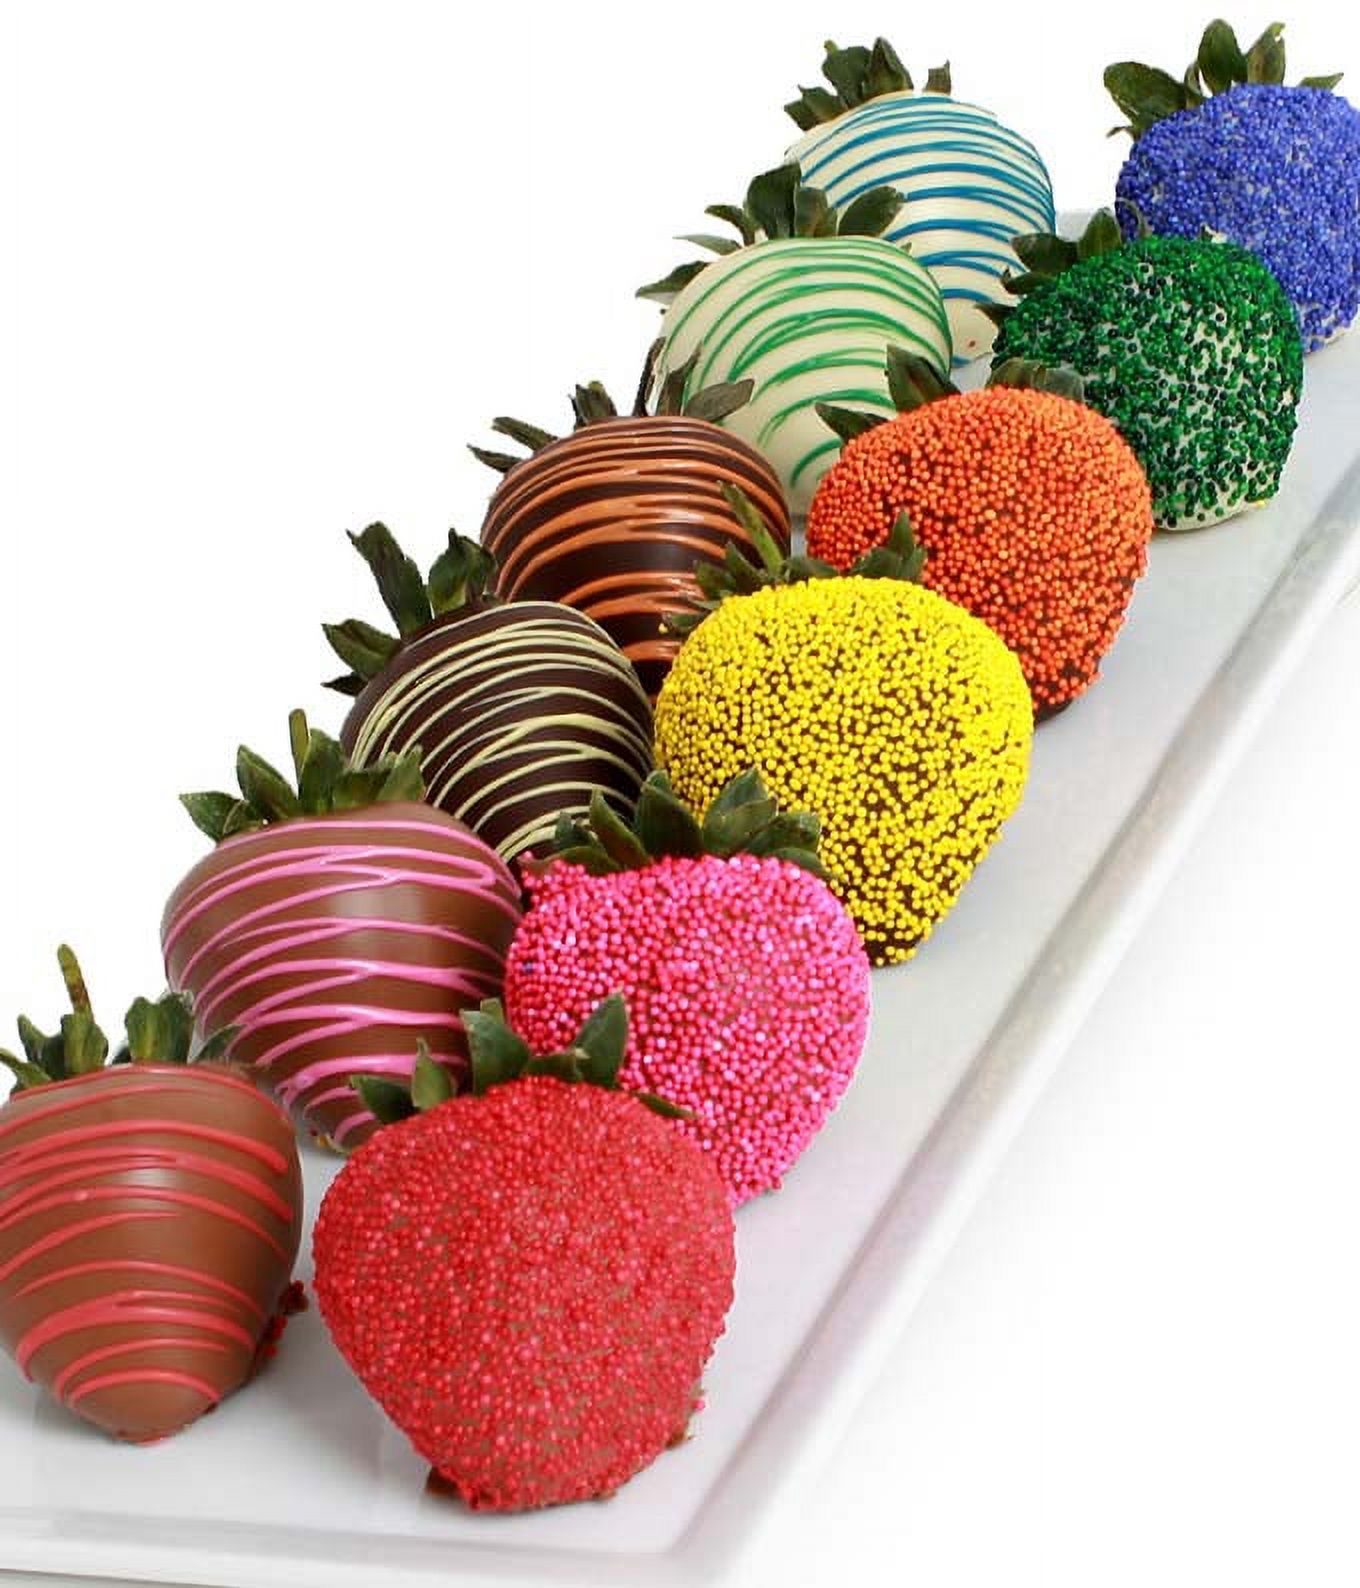 From You Flowers - Rainbow Chocolate Covered Strawberries 